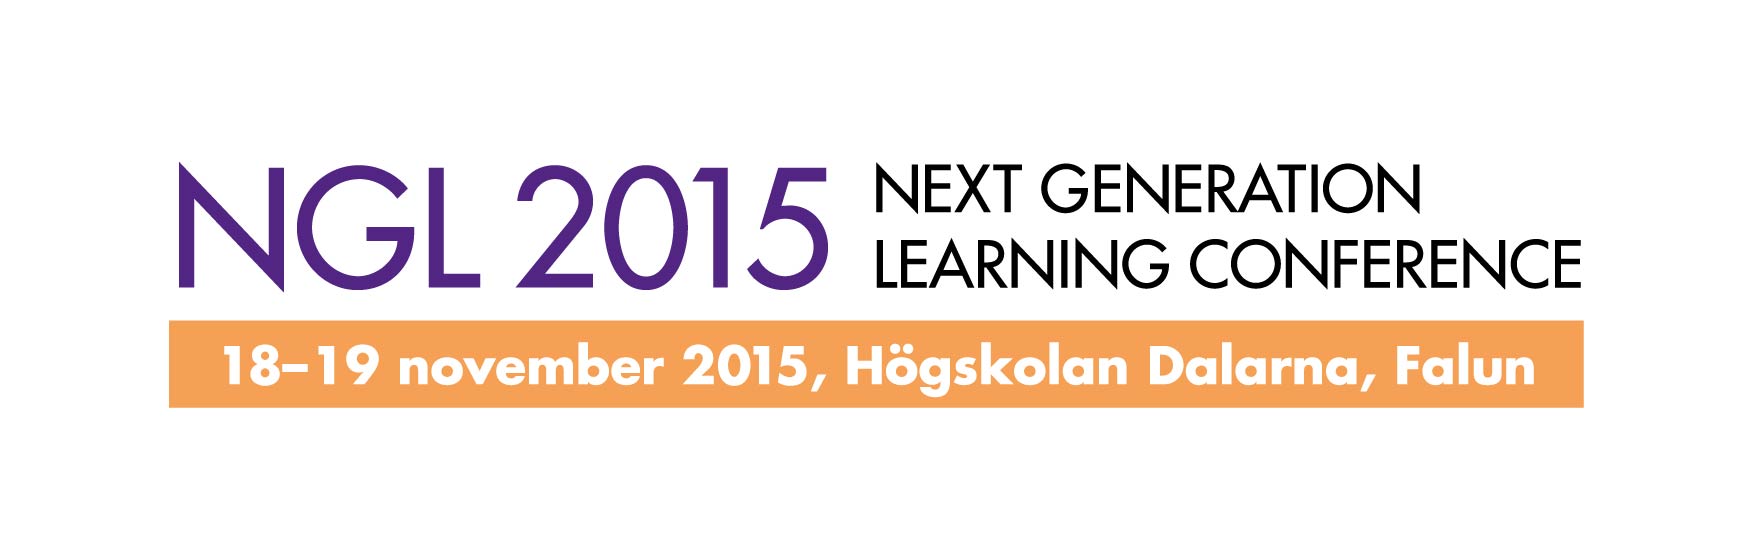 Next Generation Learning Conference 2015 1